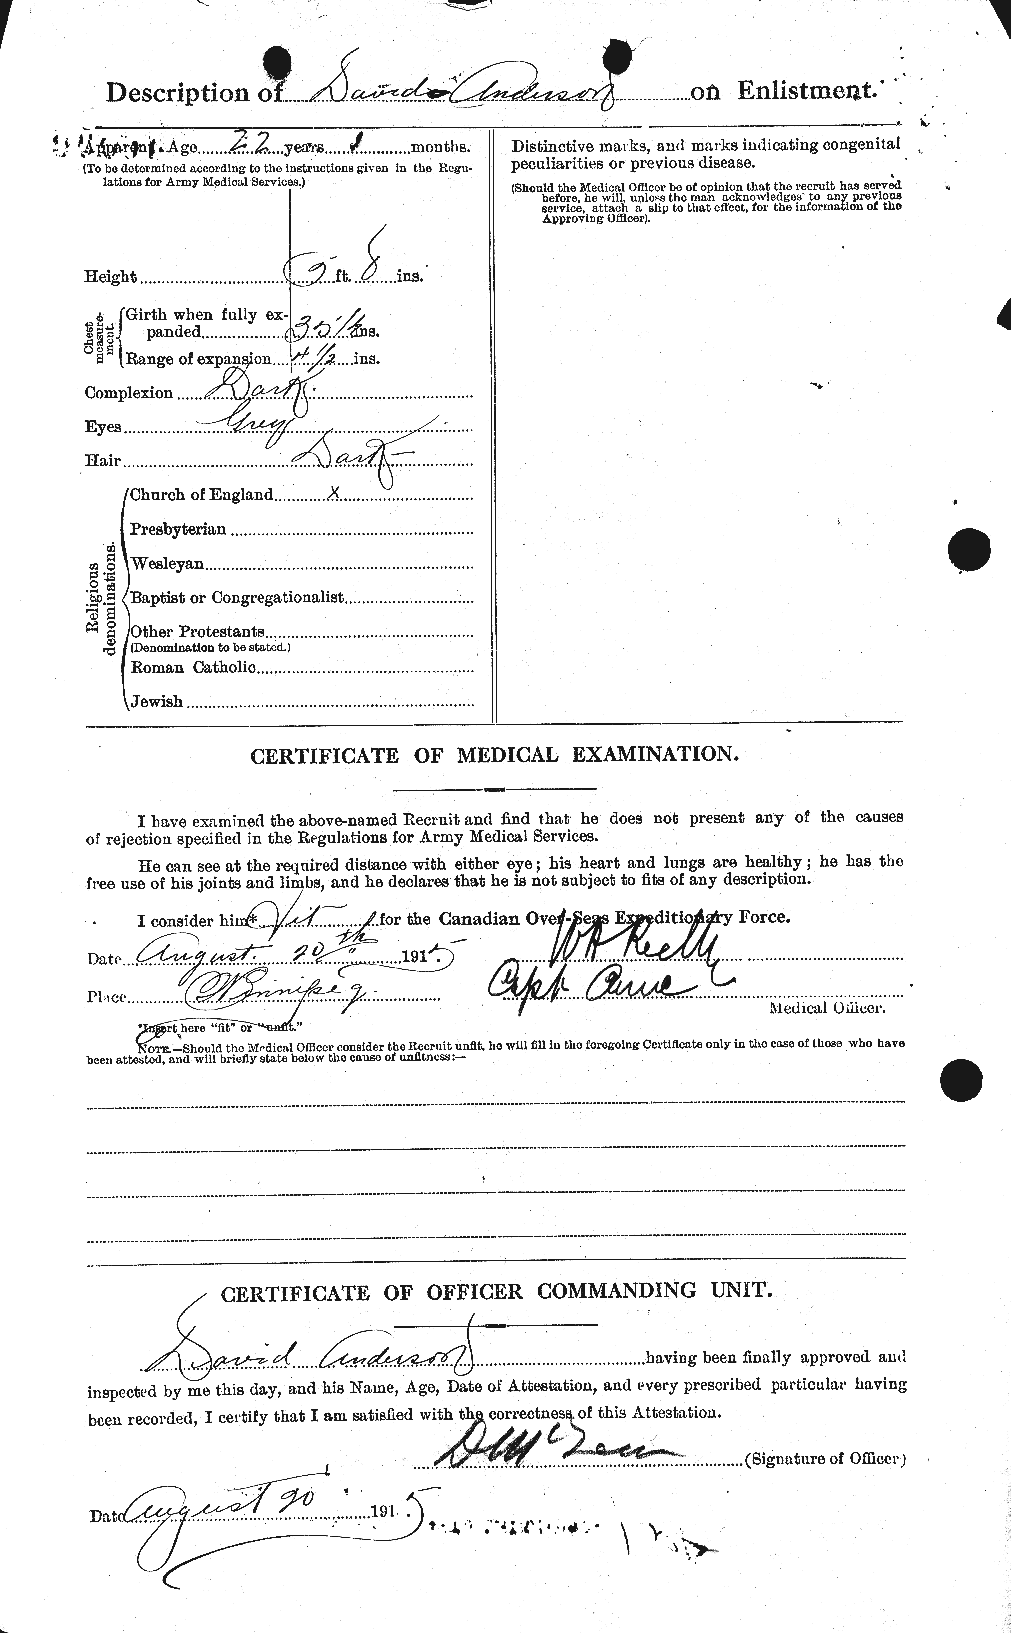 Personnel Records of the First World War - CEF 210024b